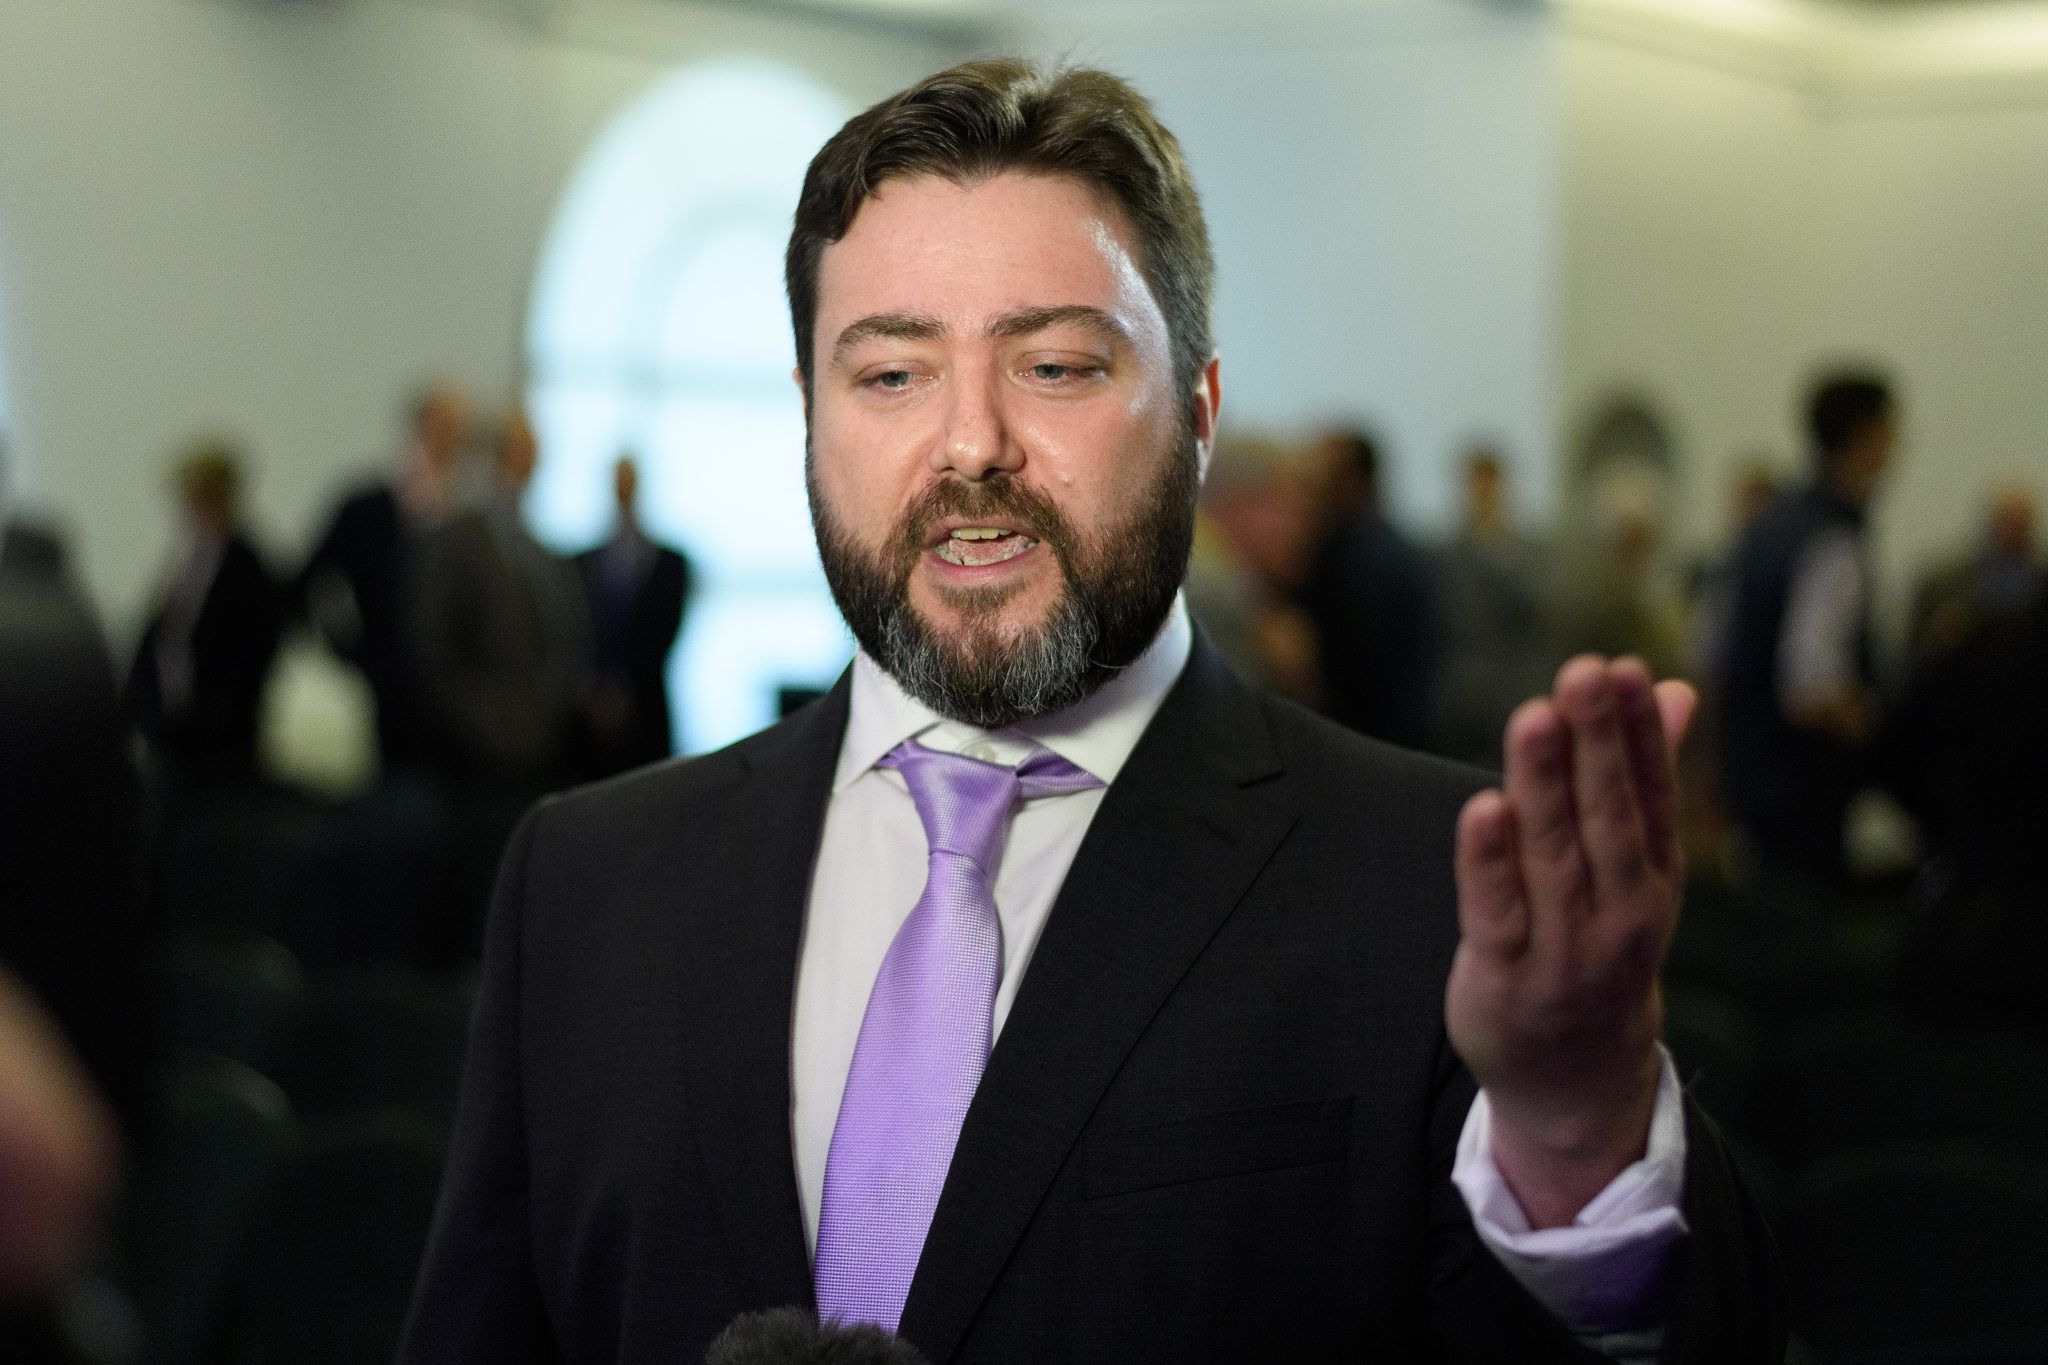 outuber Carl Benjamin is interviewed following a UKIP press conference on April 18, 2019 in London, England. As the date for Brexit has been extended, it is likely that the UK will take part in the forthcoming European Elections to choose MEPs to represent regions of the UK in the European Parliament. (Photo by Leon Neal/Getty Images)